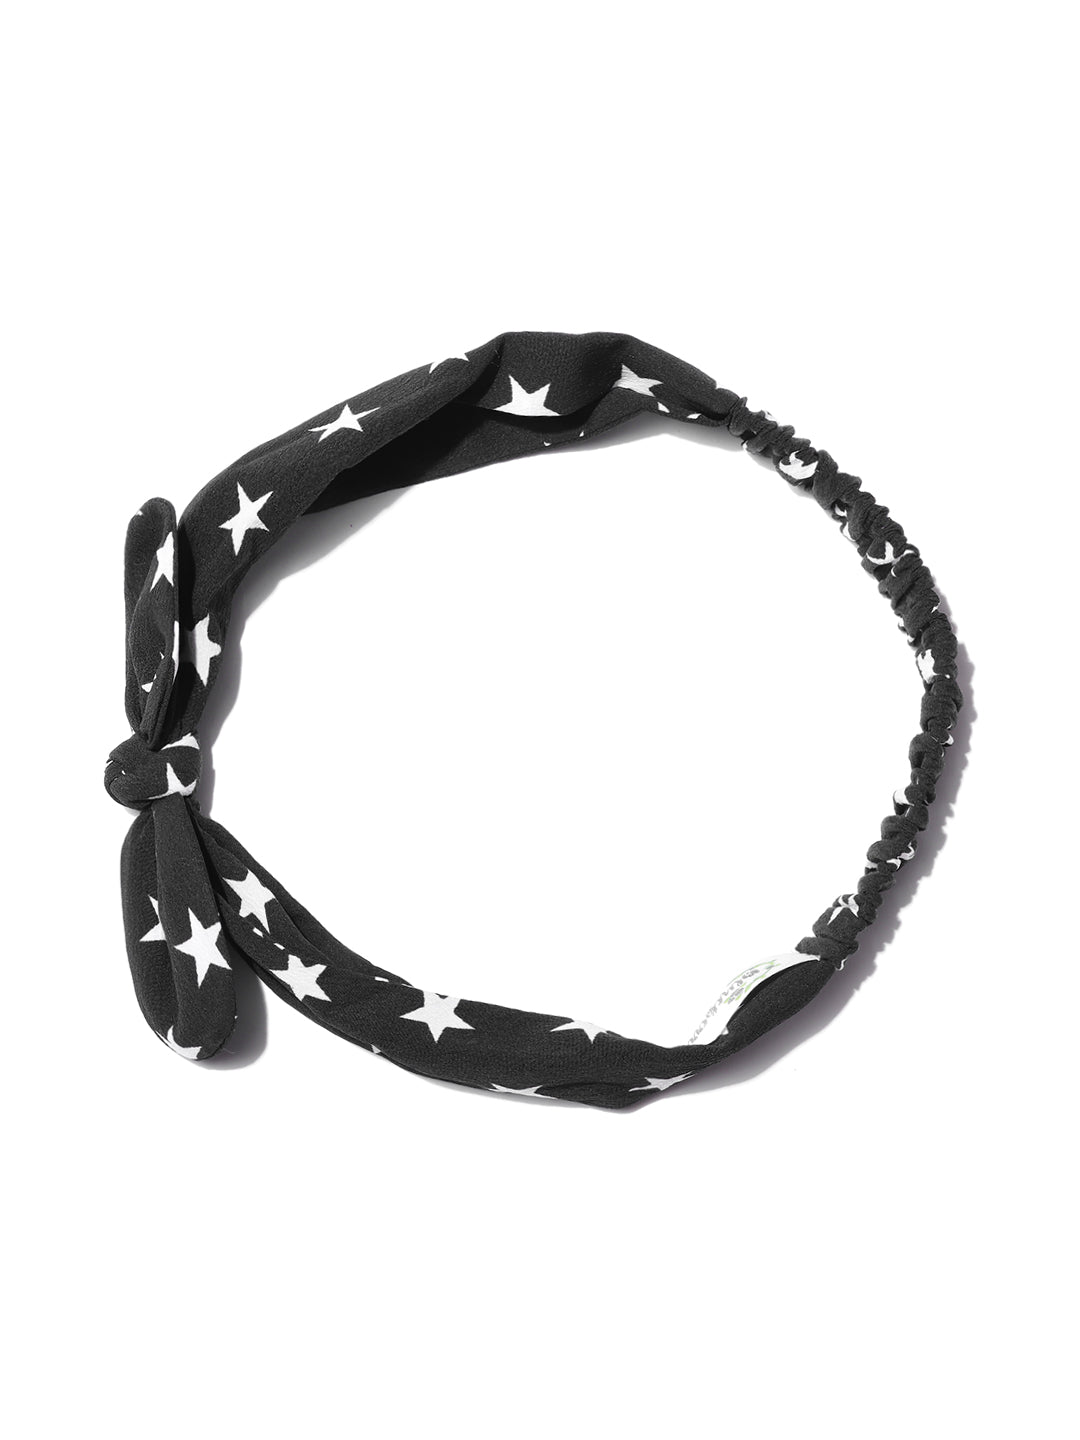 Jewelz Eye Catching Black Colour Hair Band With Stones for Girls and Women   Jewelz